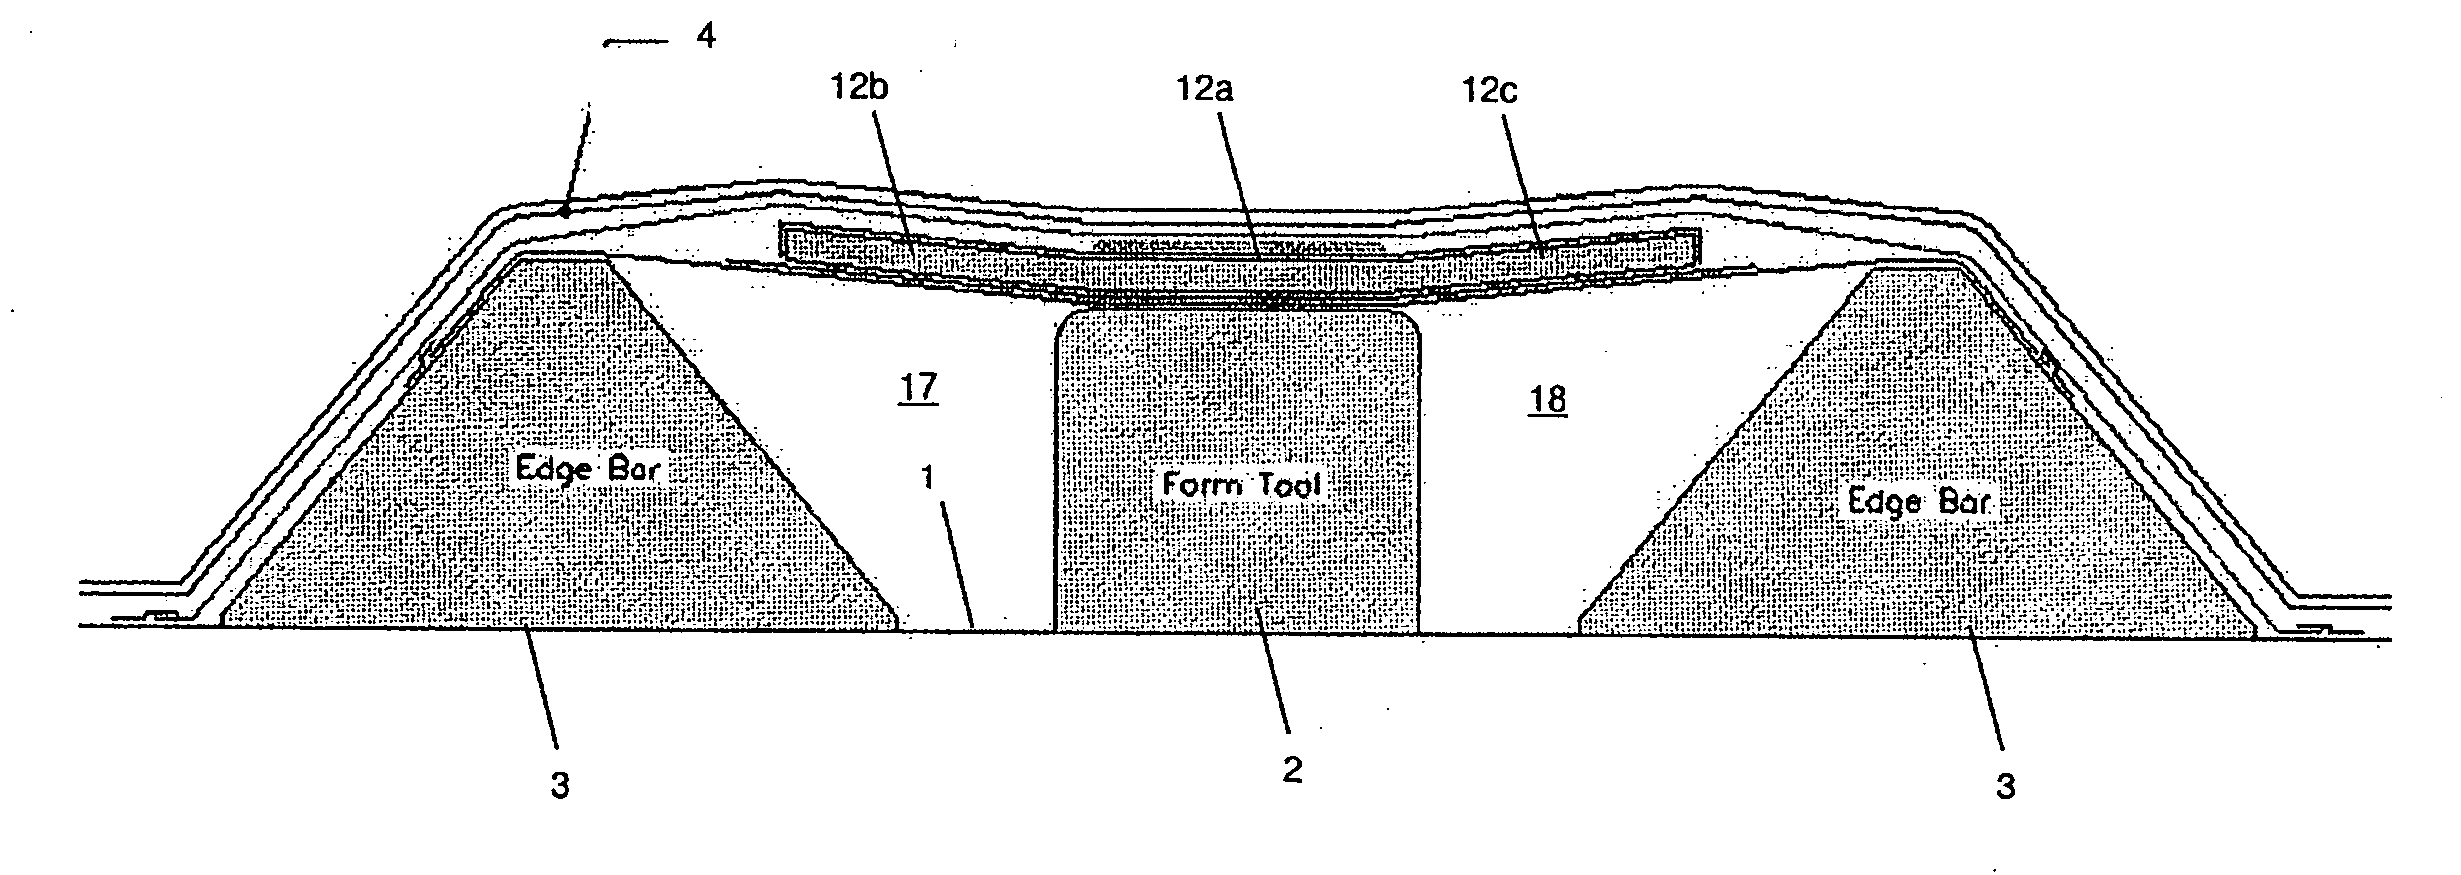 Method of monitoring the performance of a pressure intensifier